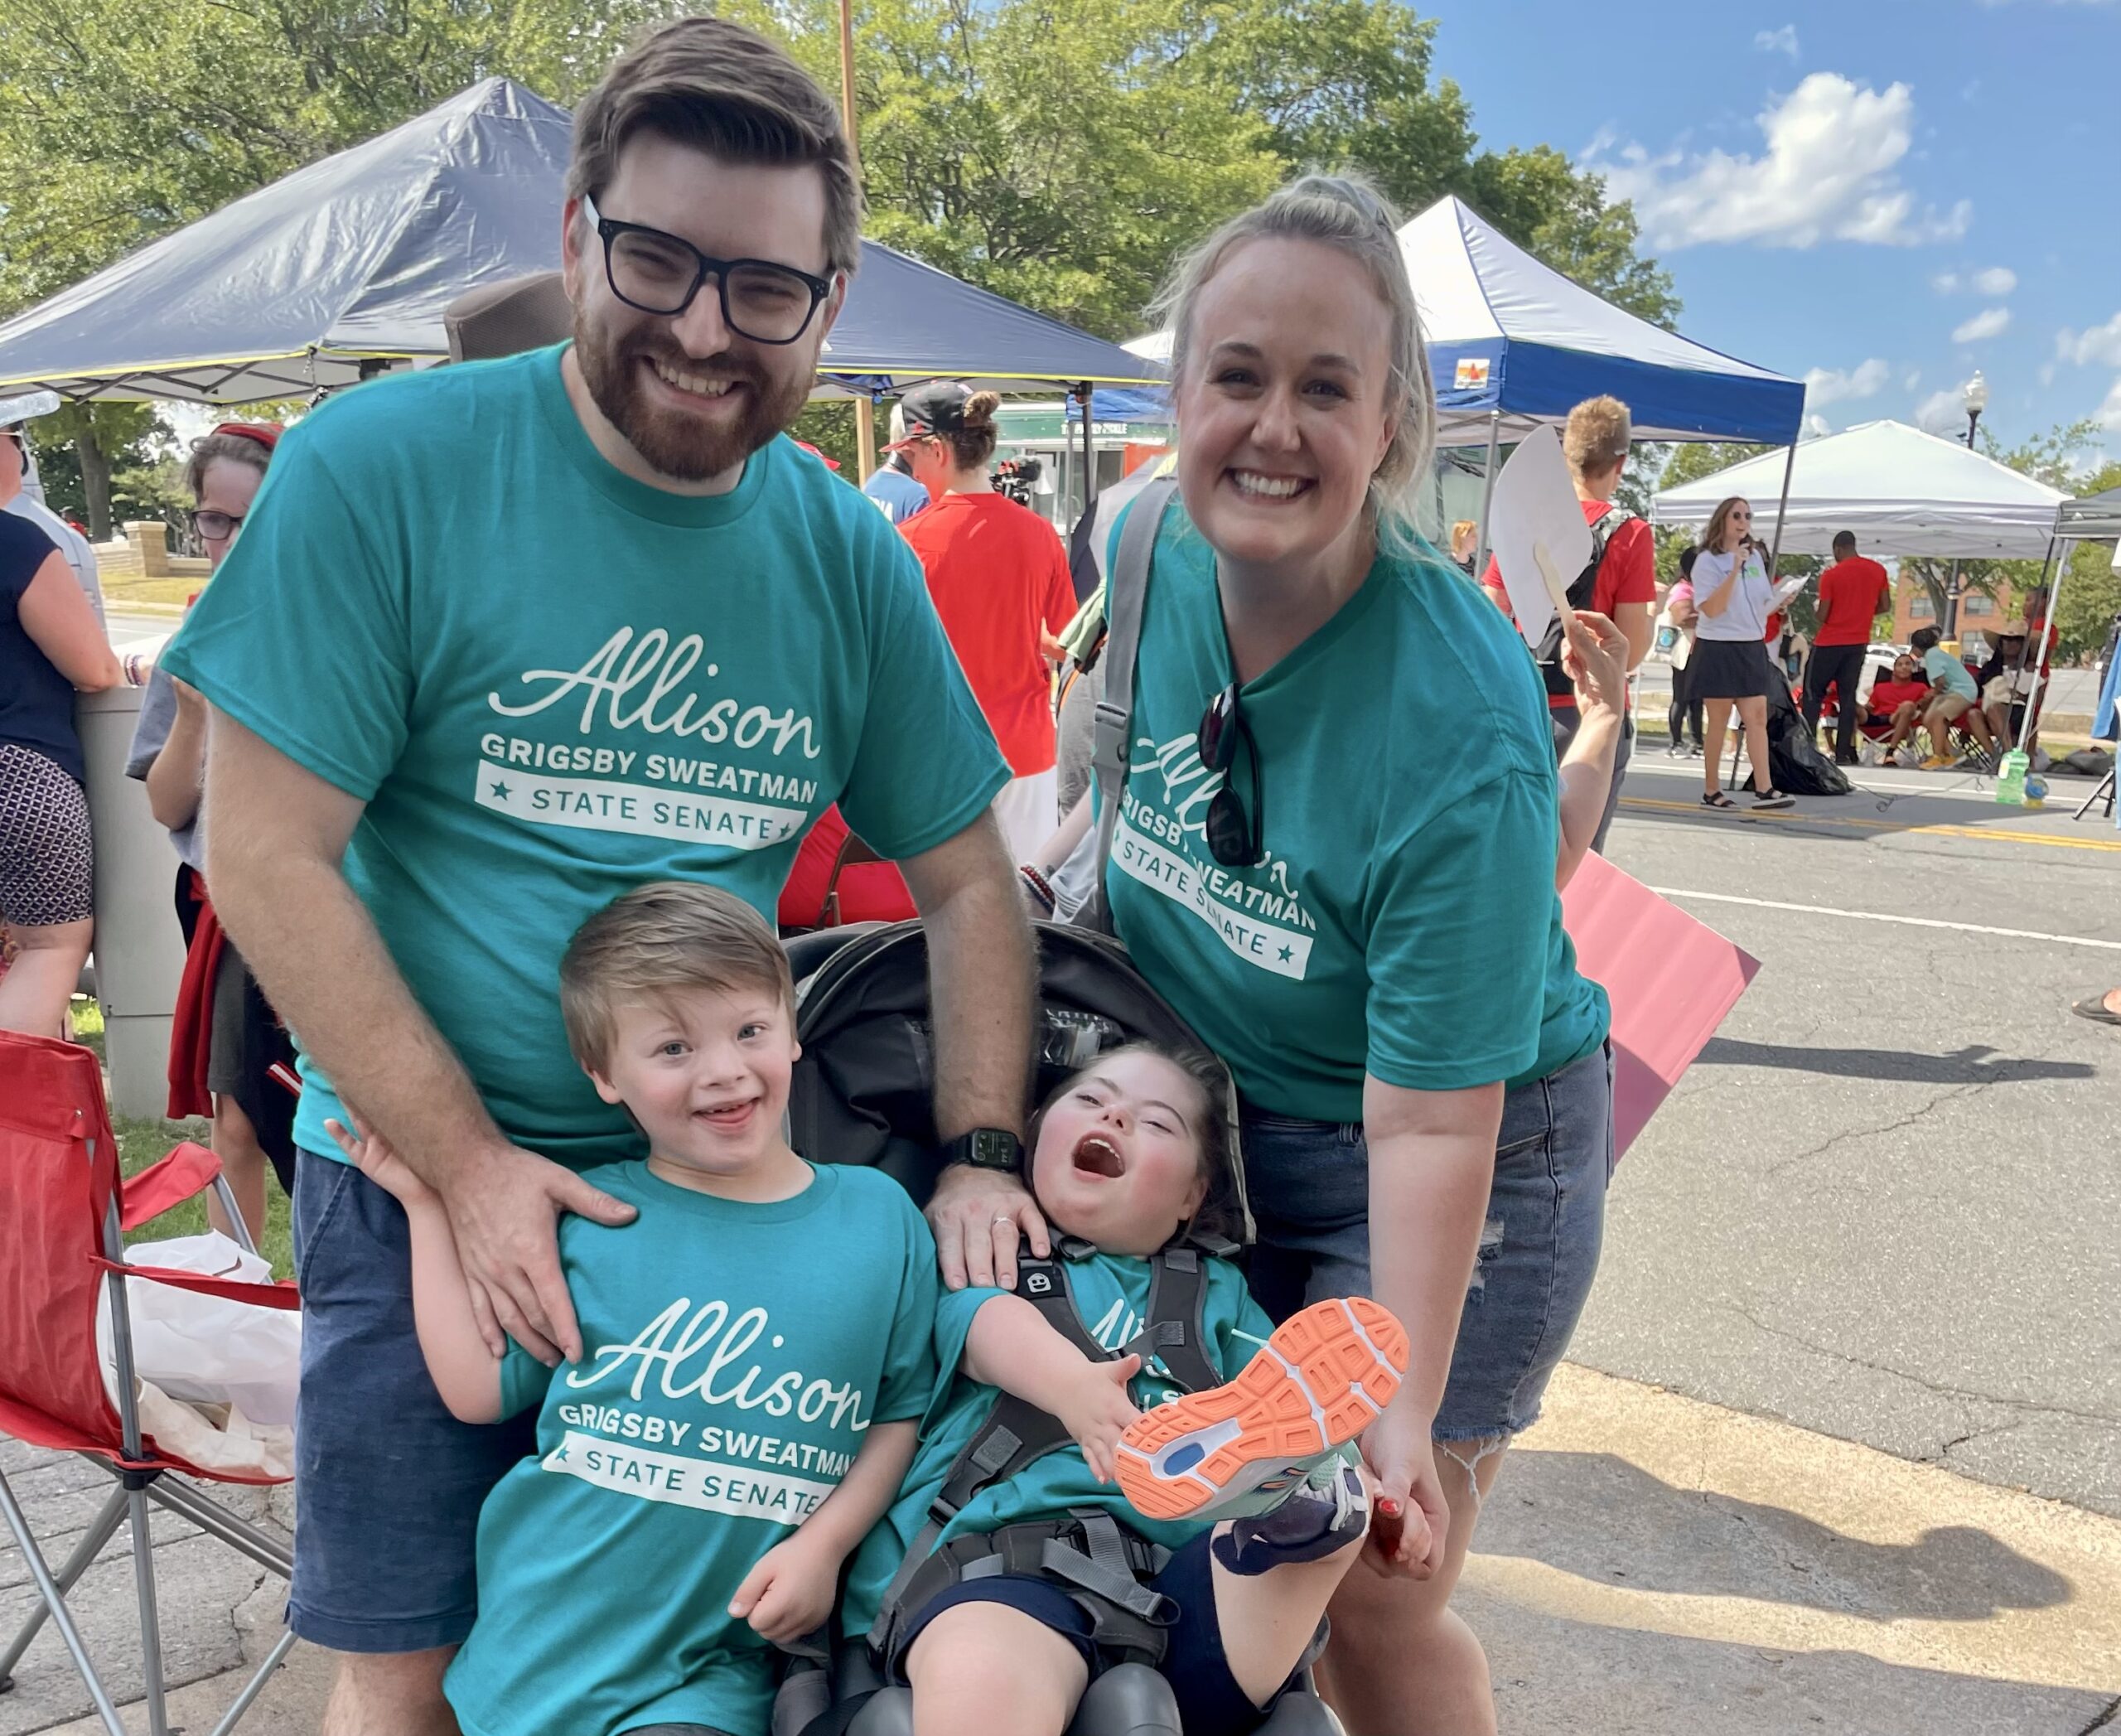 Two adults and two children wearing matching teal Allison for AR shirts